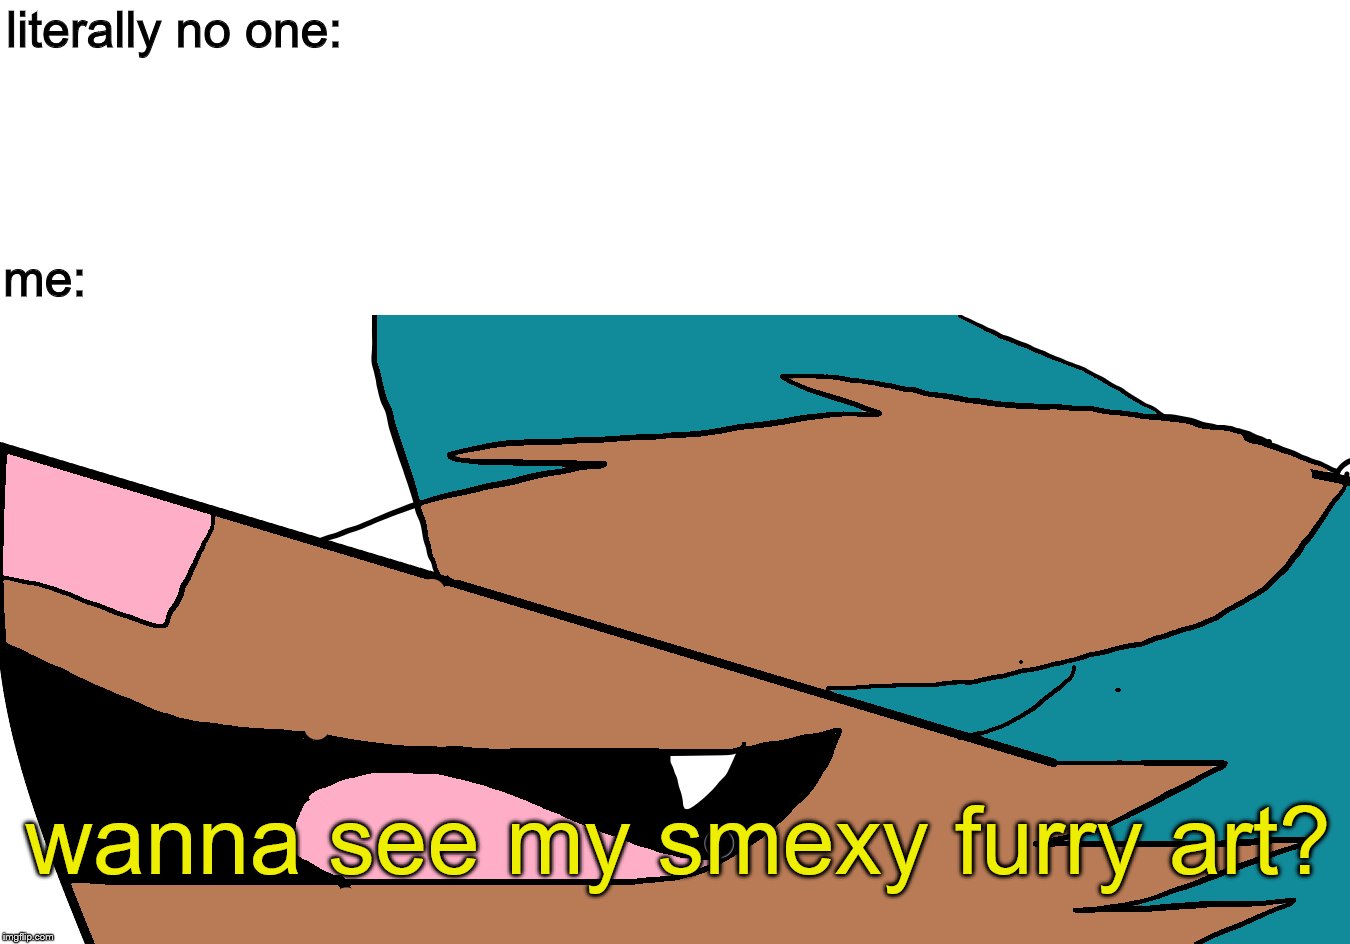 OwO | literally no one:; me:; wanna see my smexy furry art? | image tagged in memes,furry,literally,no one cares | made w/ Imgflip meme maker